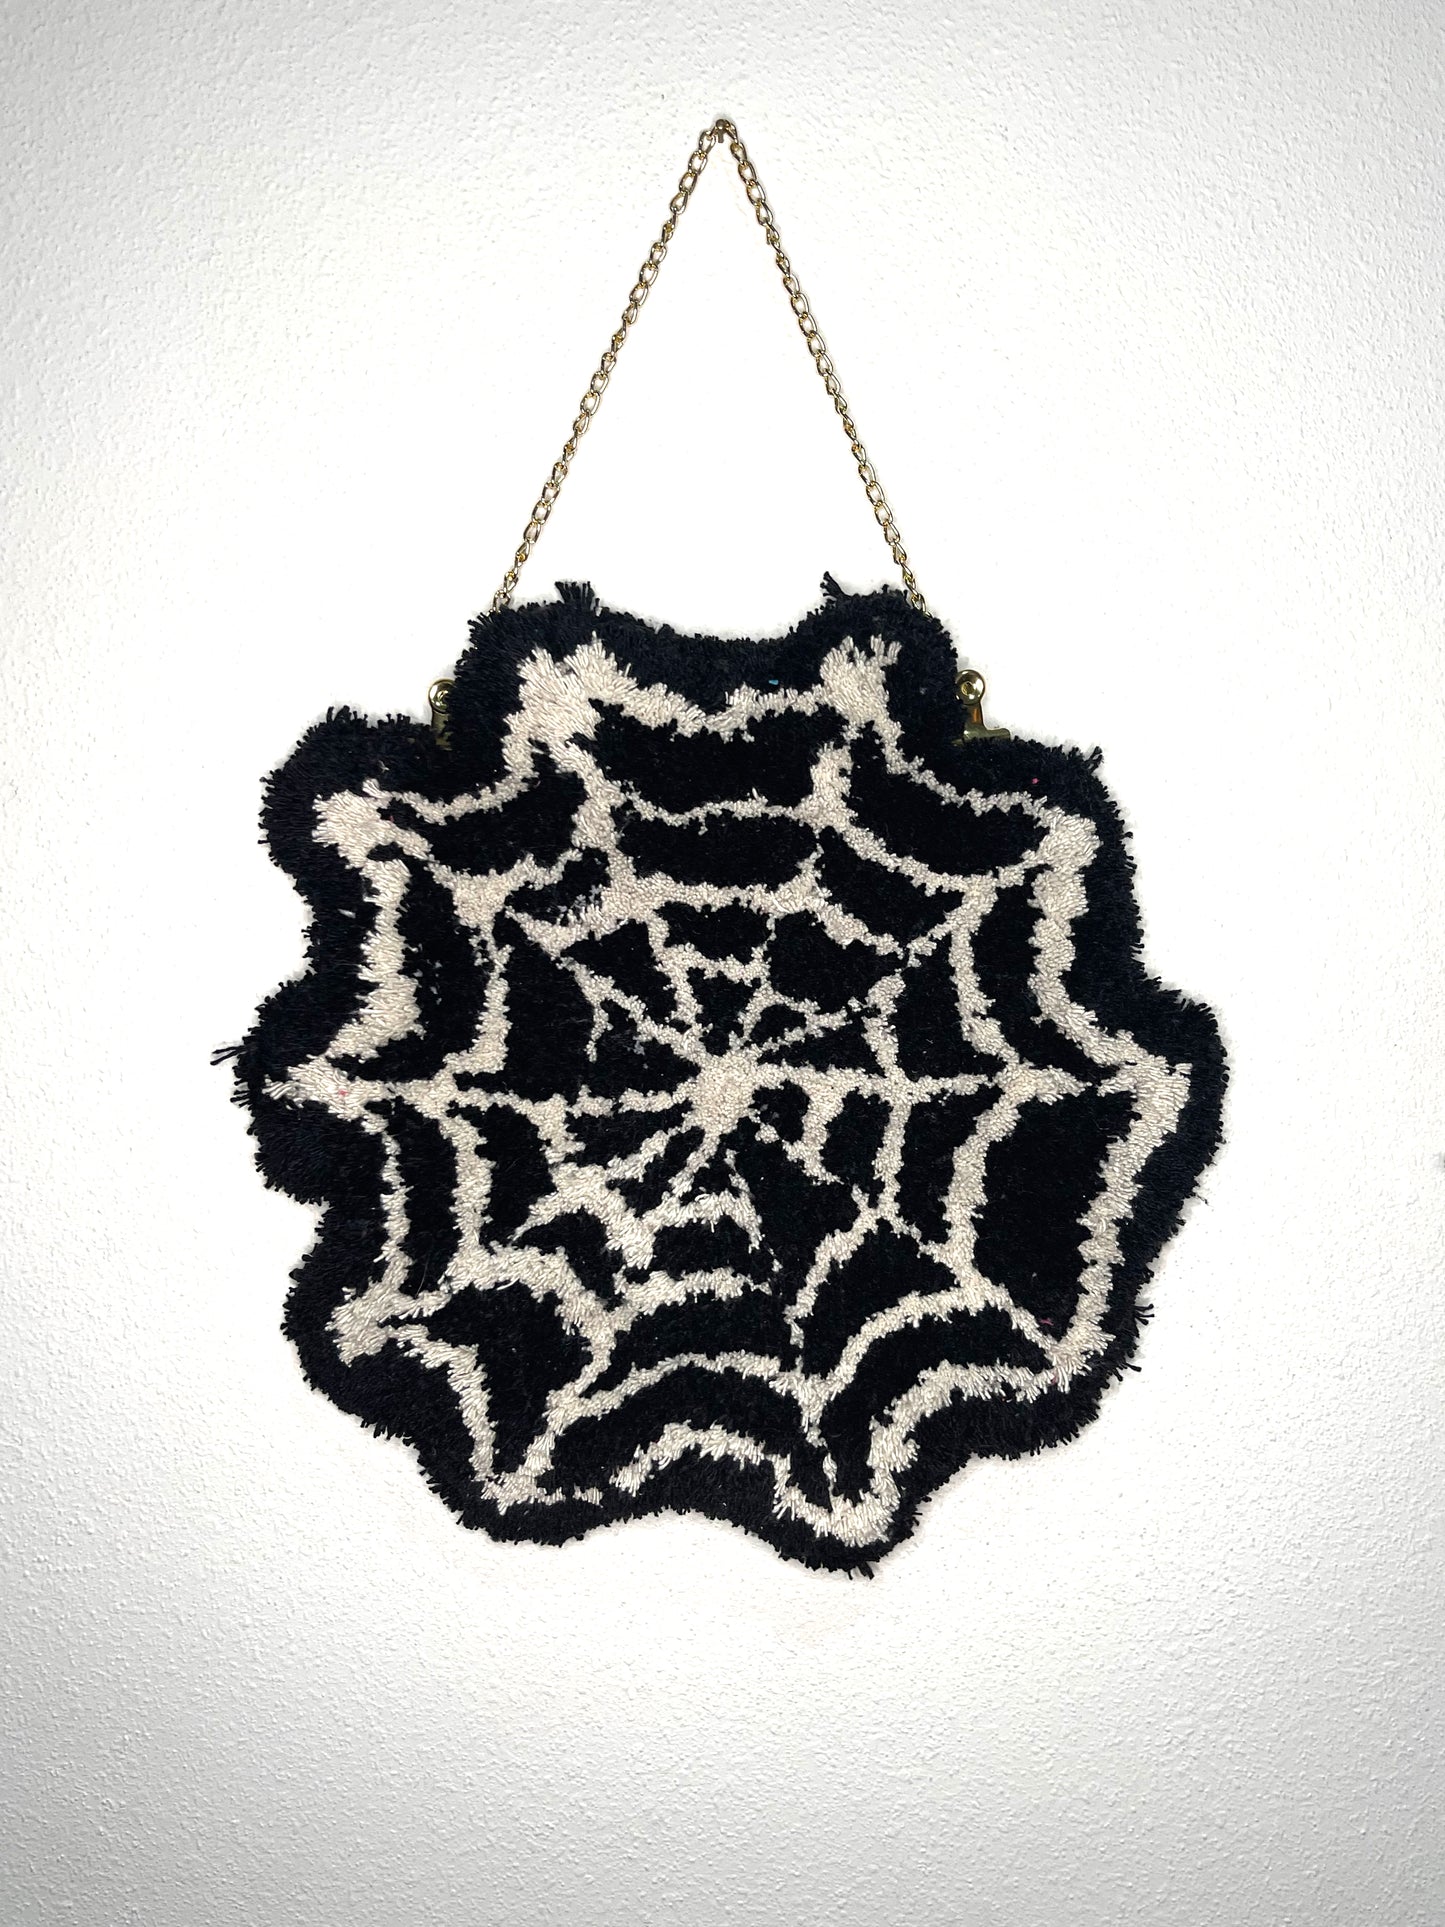 Spider Web Wall Hanging/Decoration